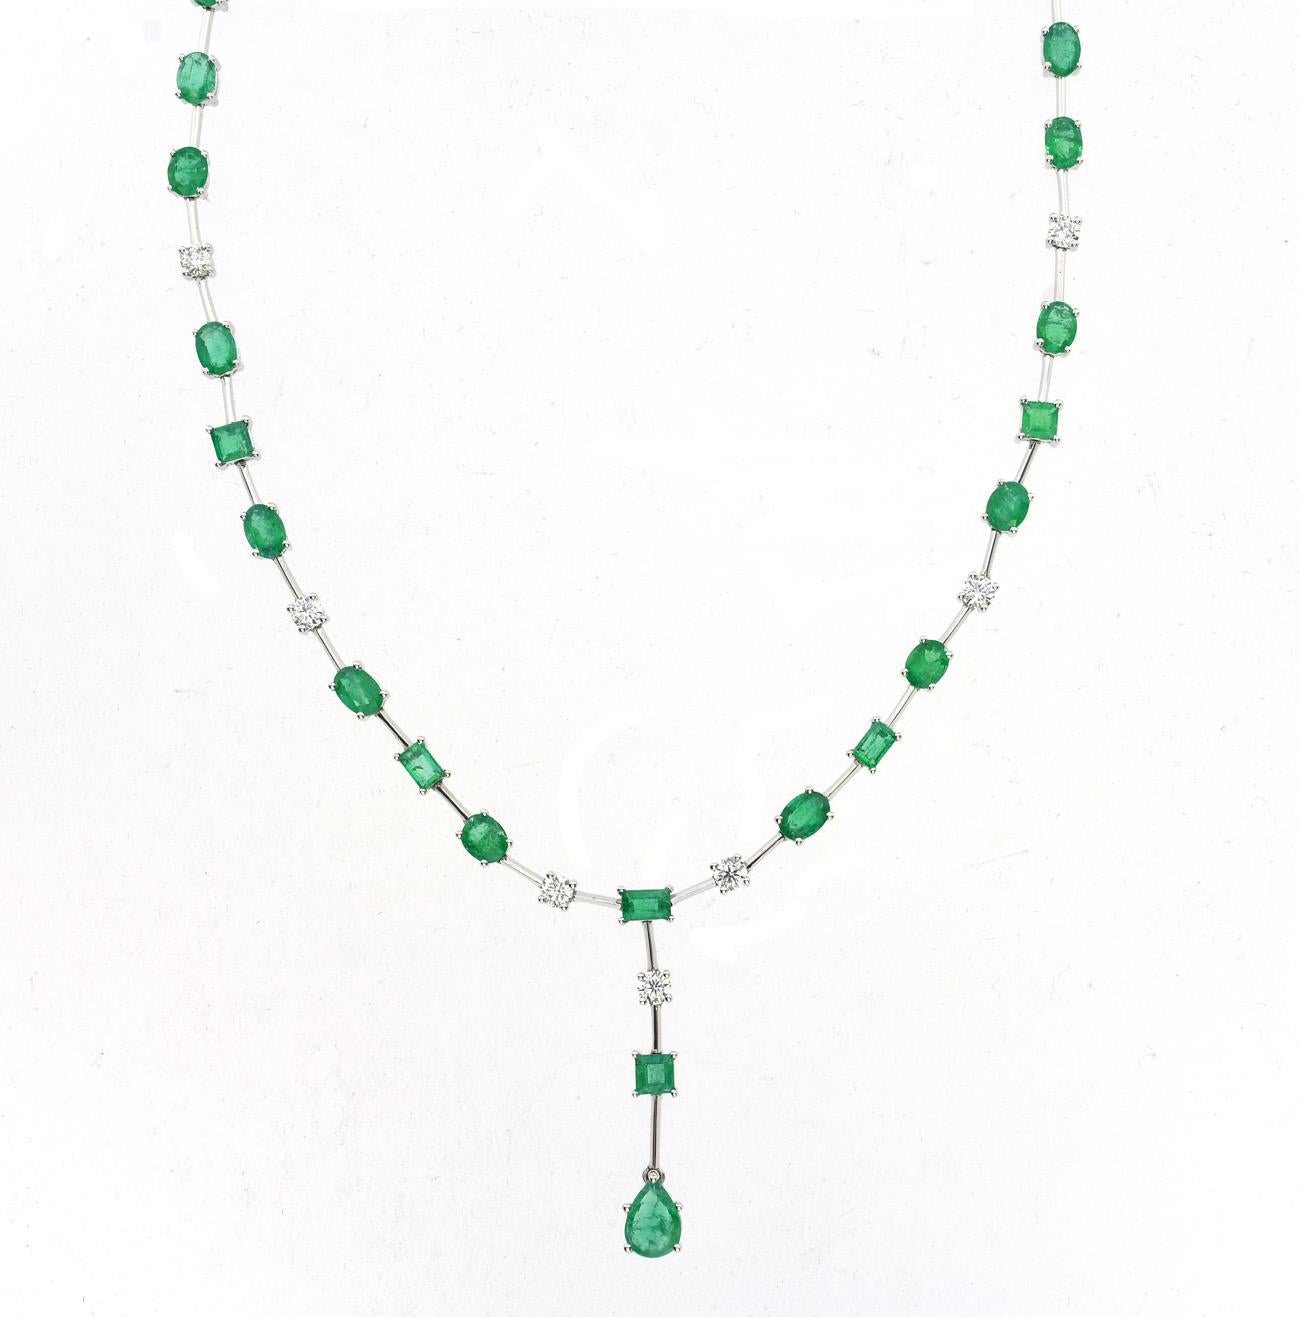 The showstopping 14.67 carat emerald and white diamond drop necklace is perfect for any occasion. This 18k white gold necklace features 2.29 carat white diamonds and 12.38 carat emeralds. The white diamonds are round cut, while the emeralds are